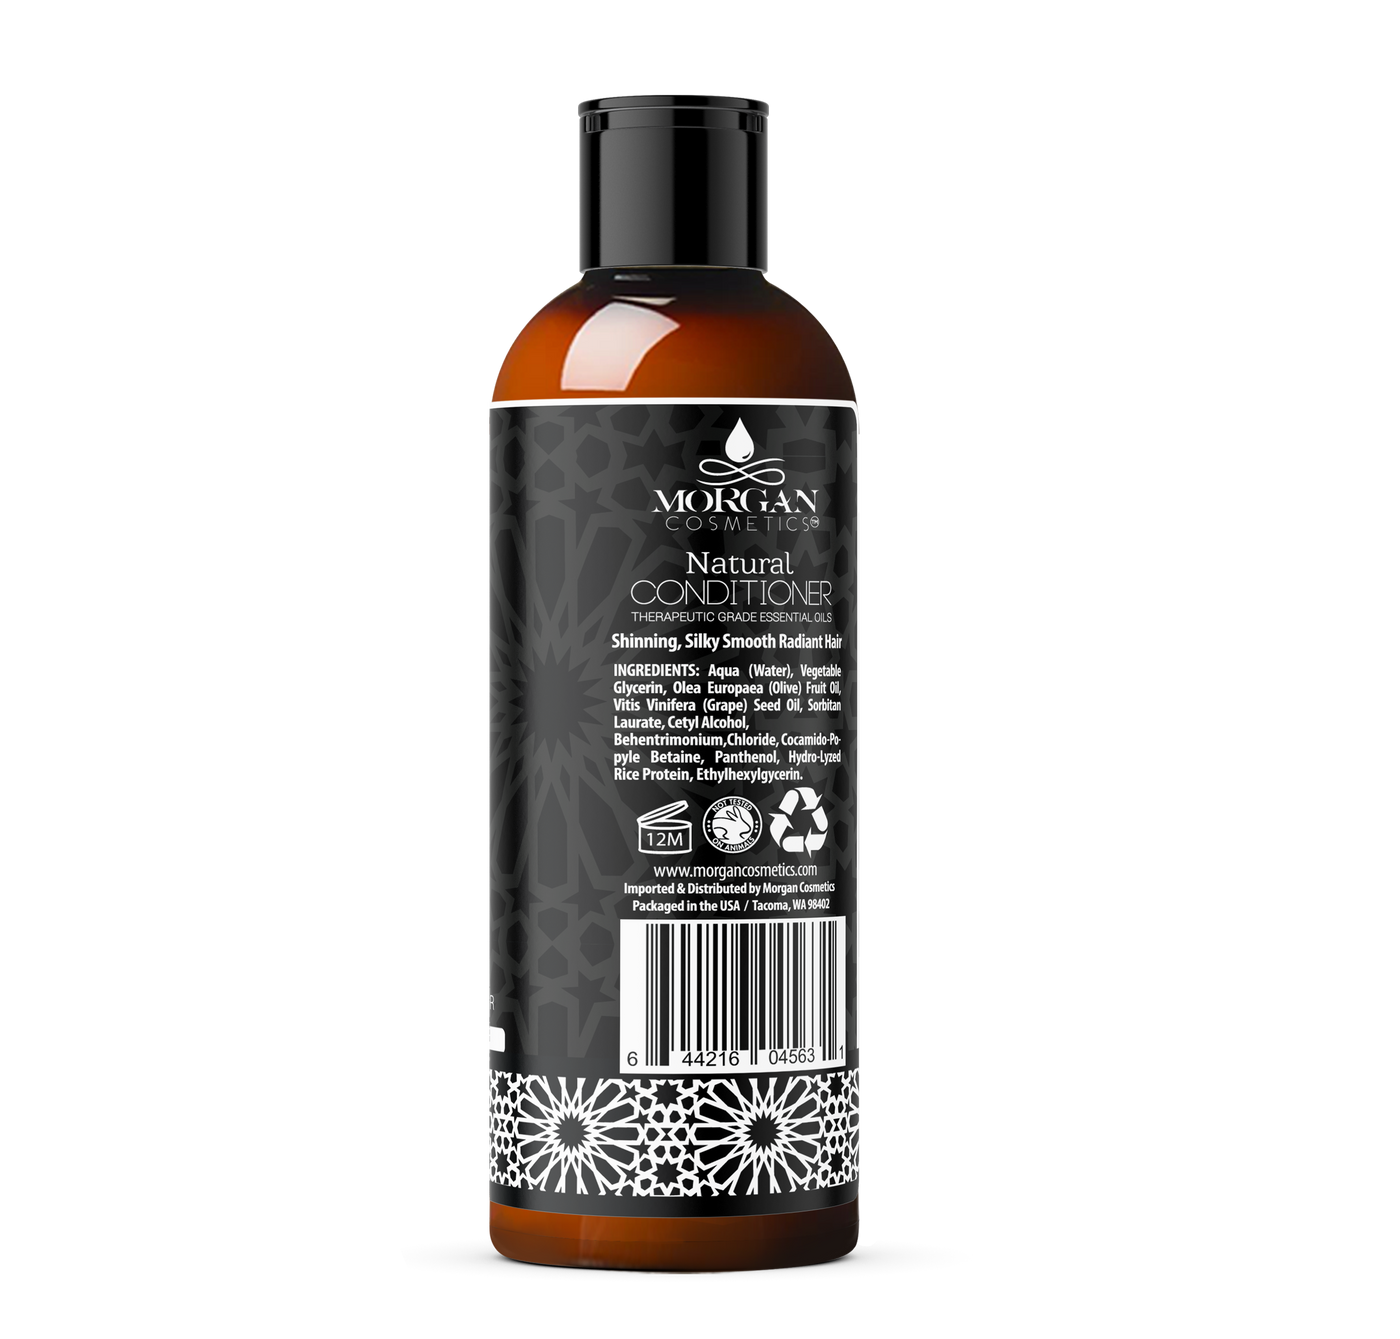 ARGAN NATURAL CONDITIONER LAVENDER 16 OZ Conditioner Lavender - Argan Conditioner Is Also Paraben Free and Synthetic Fragrance Free - 100% Vegetarian. Made In USA. by Morgan Cosmetics